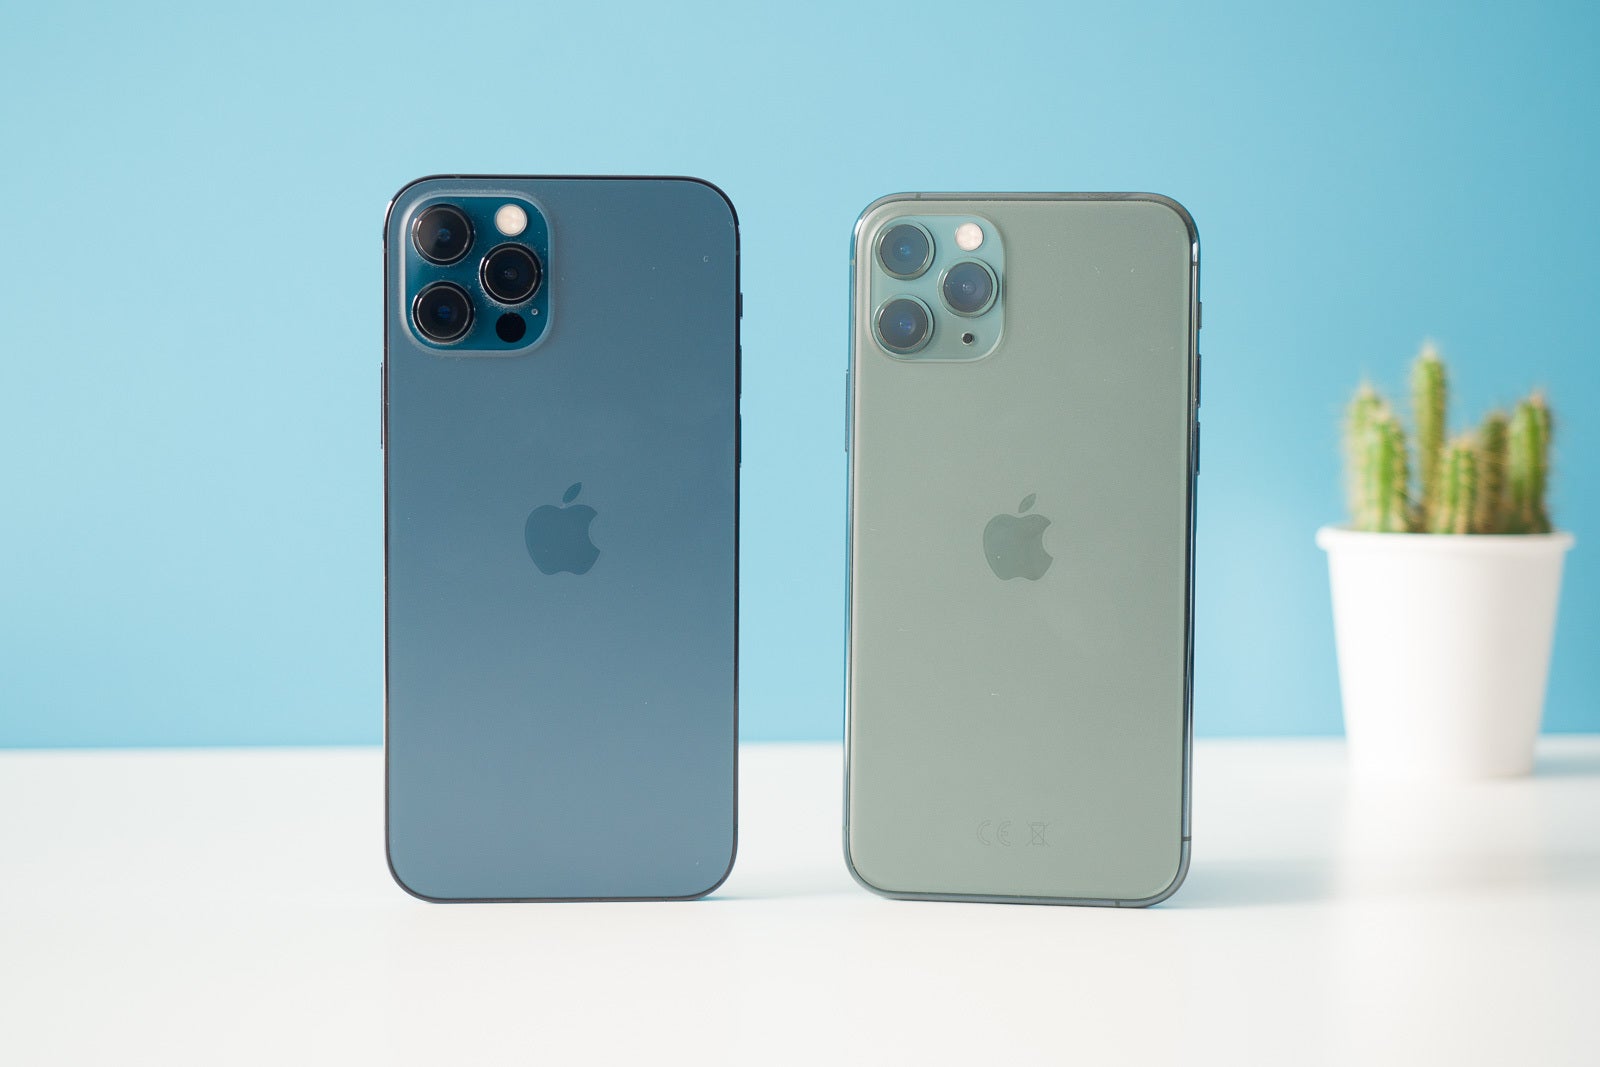 iPhone 12 Pro vs iPhone 11 Pro Camera Comparison: what has changed?